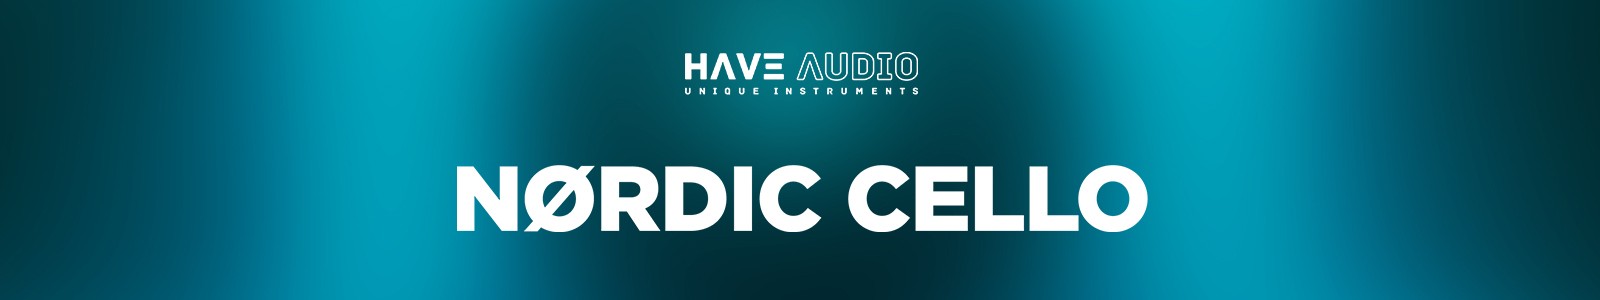 Nordic Cello by Have Audio